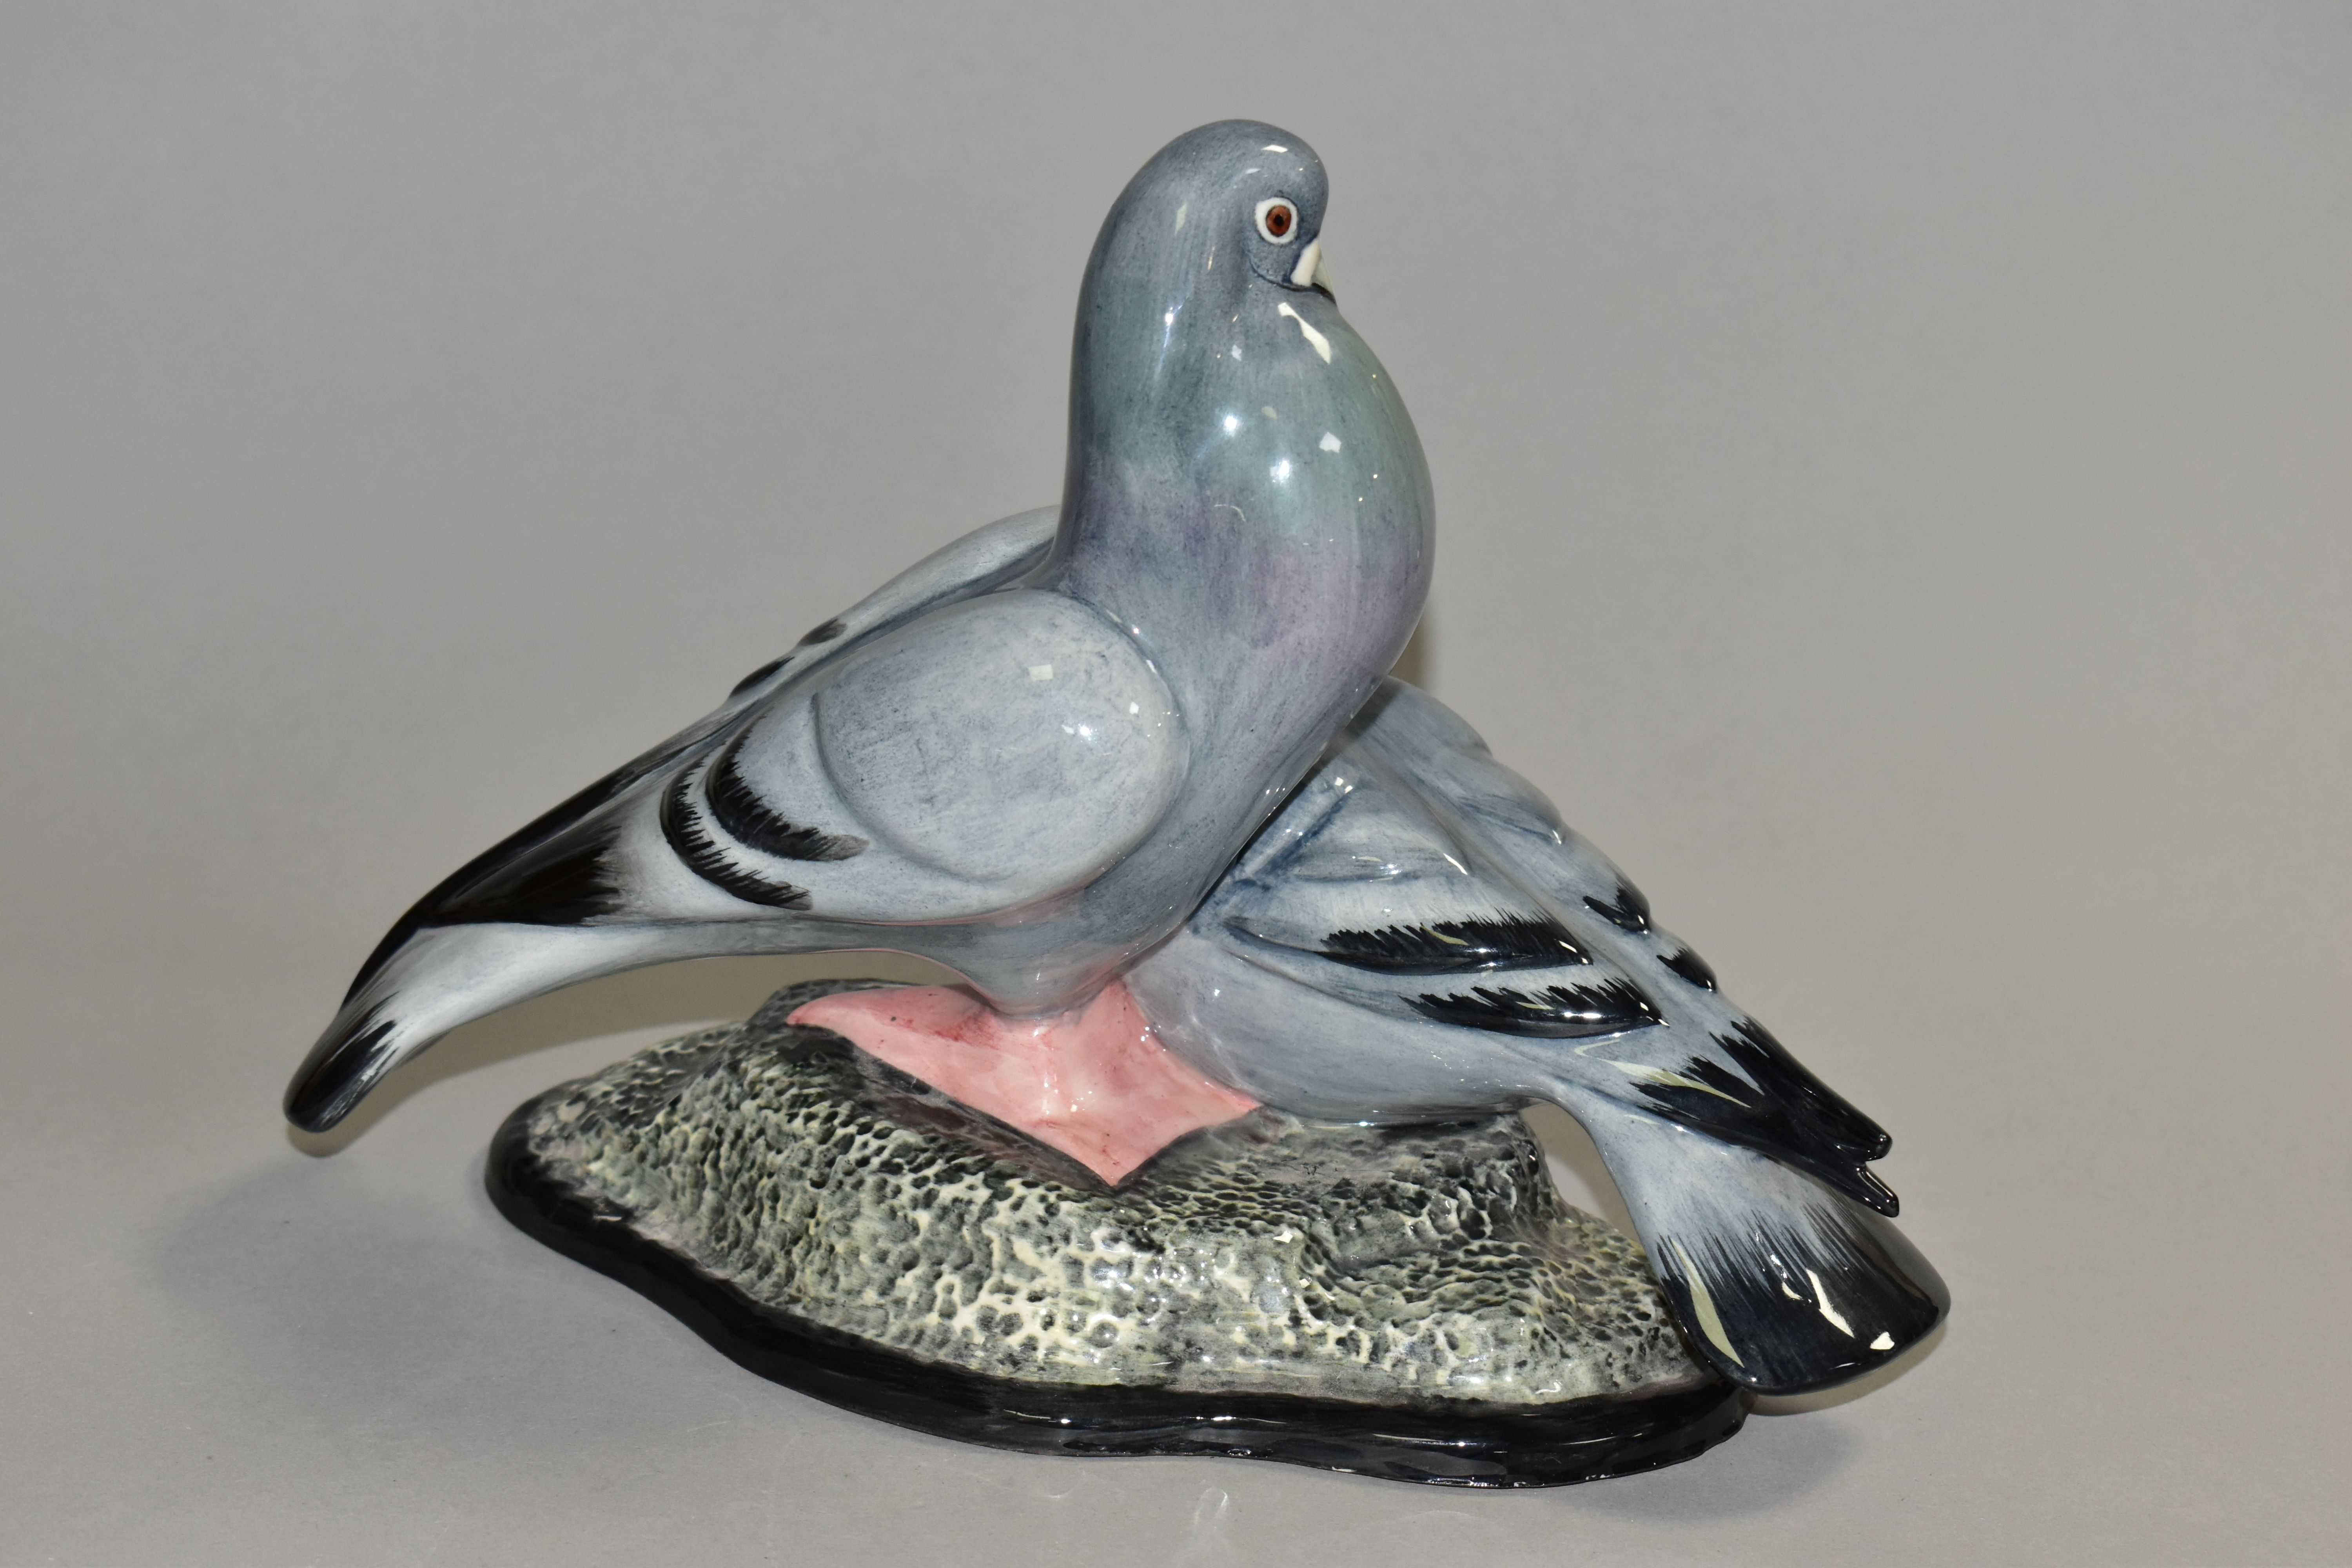 A CARLTON WARE FIGURE GROUP OF TWO PIGEONS, modelled as standing on a rocky base, printed marks